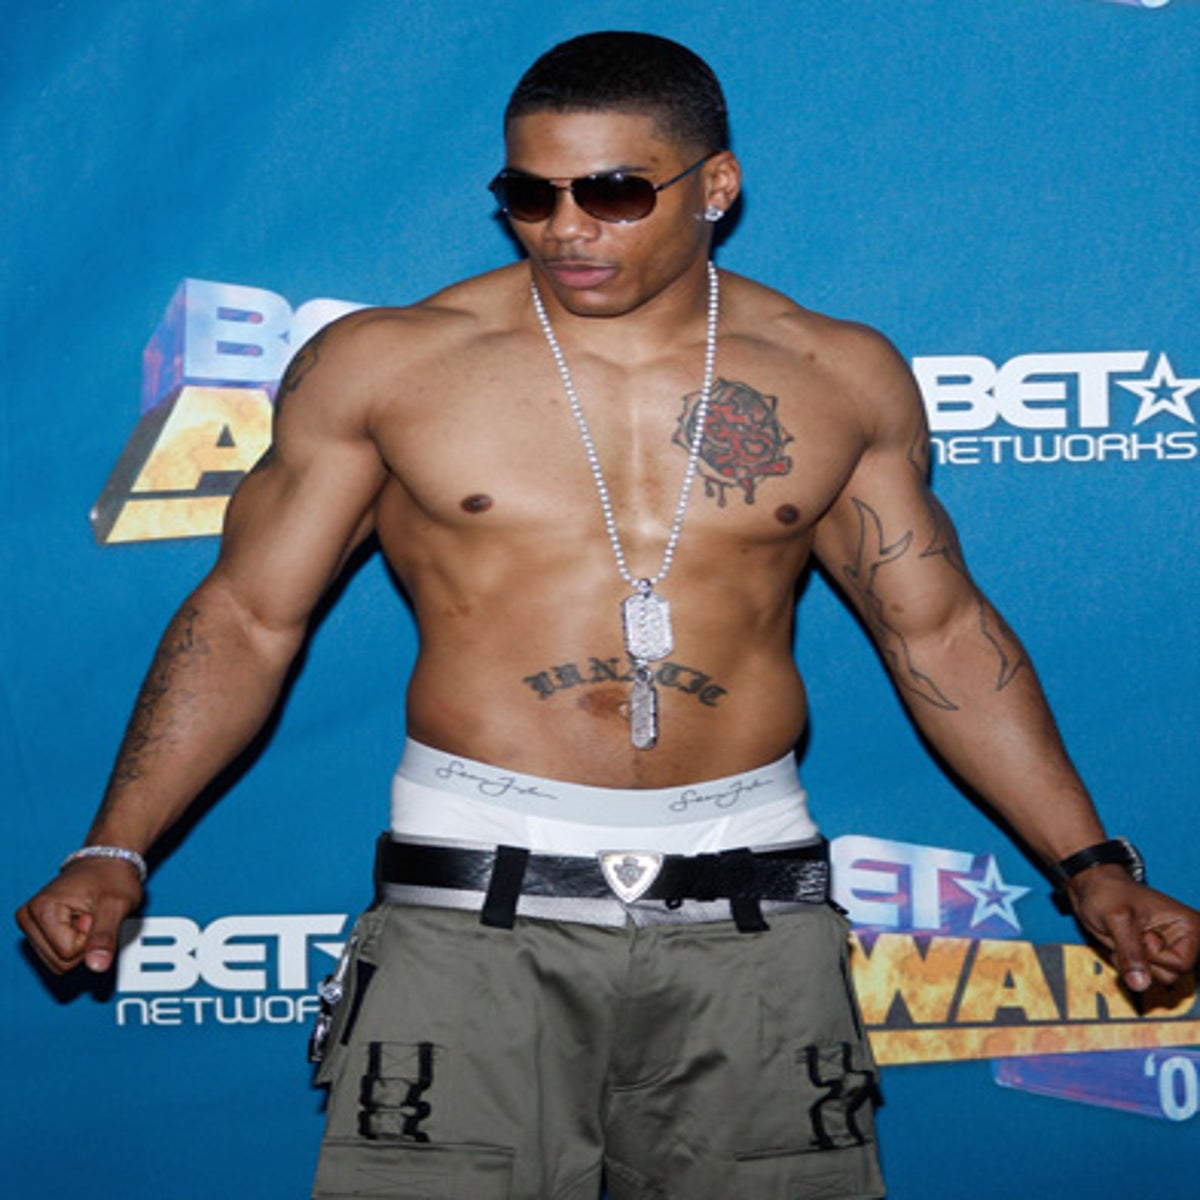 Nelly - It's called adult entertainment | The Independent | The Independent